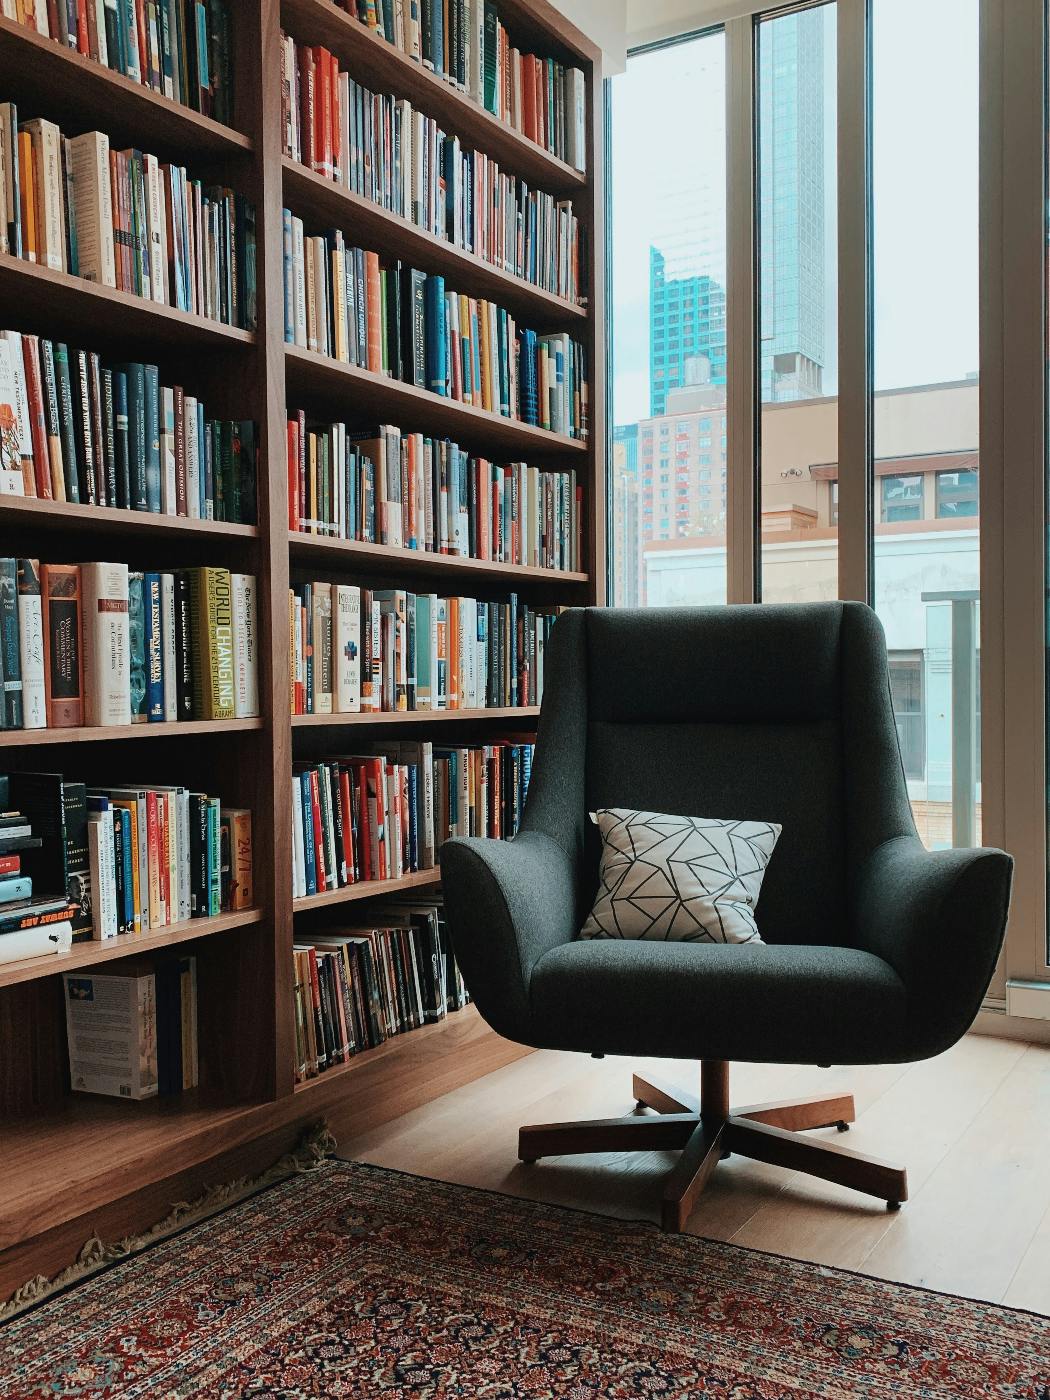 A plush green swivel chair and an area rug beside a floor to ceiling book case